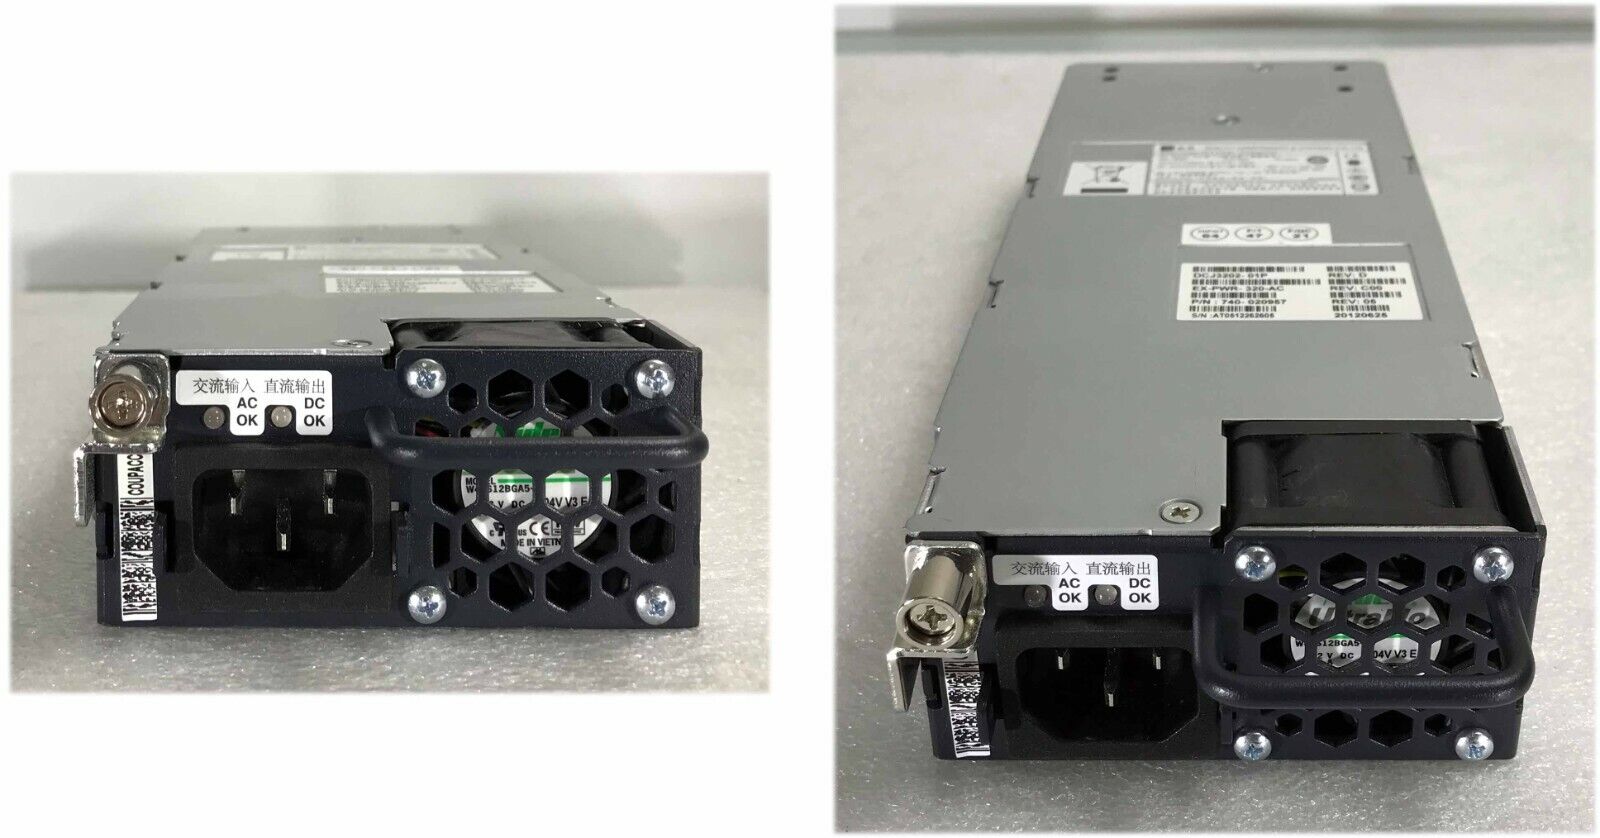 BRAND NEW - JUNIPER EX-PWR-320-AC - 320W AC Power Supply - for EX4200 and EX3200